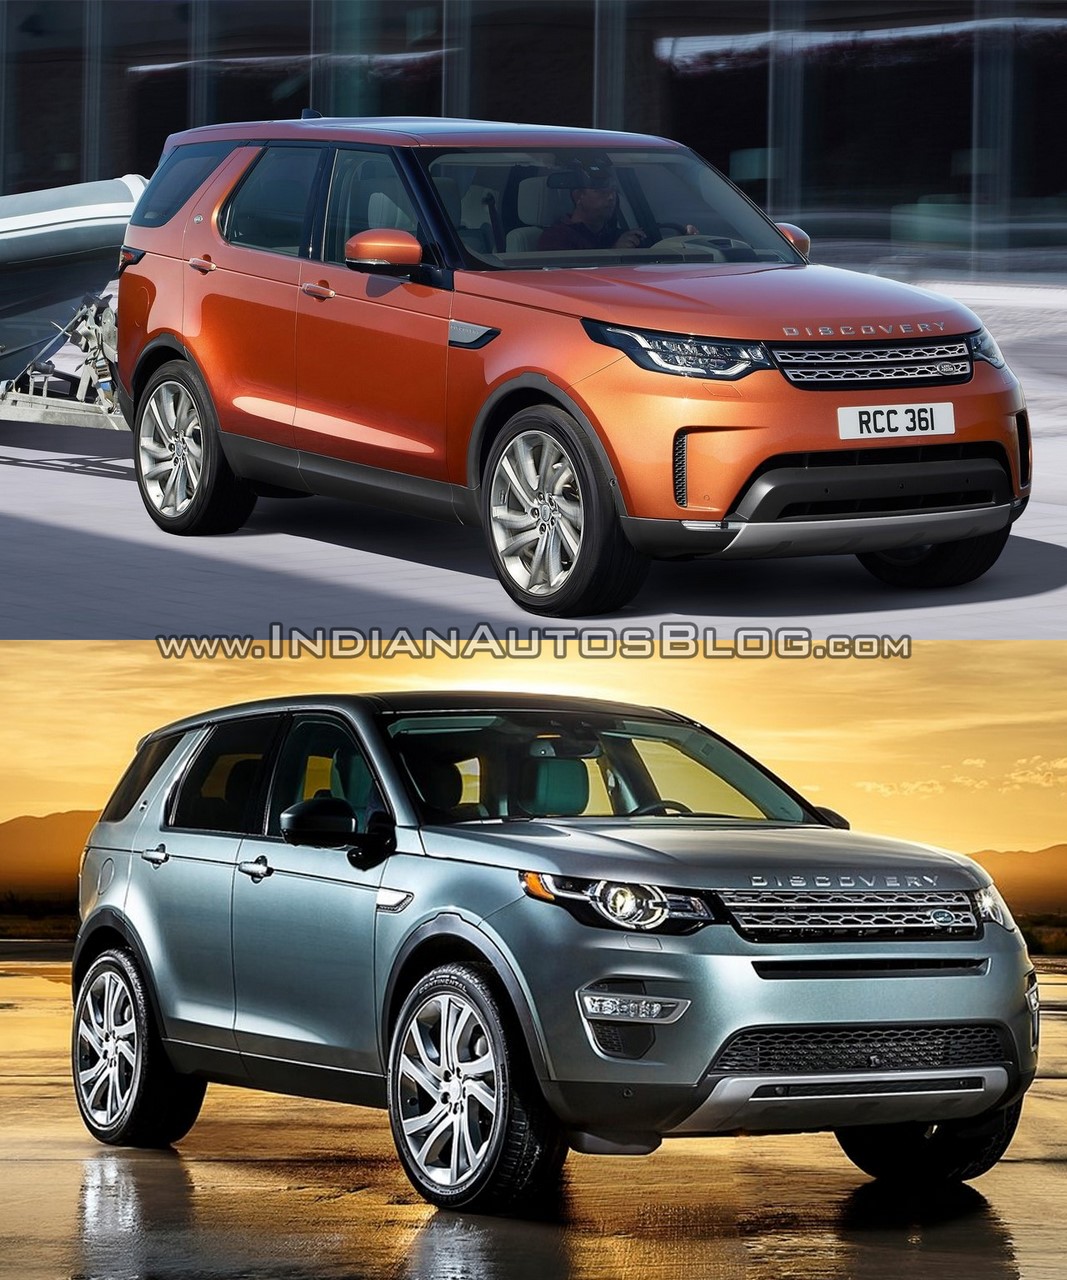 2017-land-rover-discovery-vs-land-rover-discovery-sport-front-three-quarters